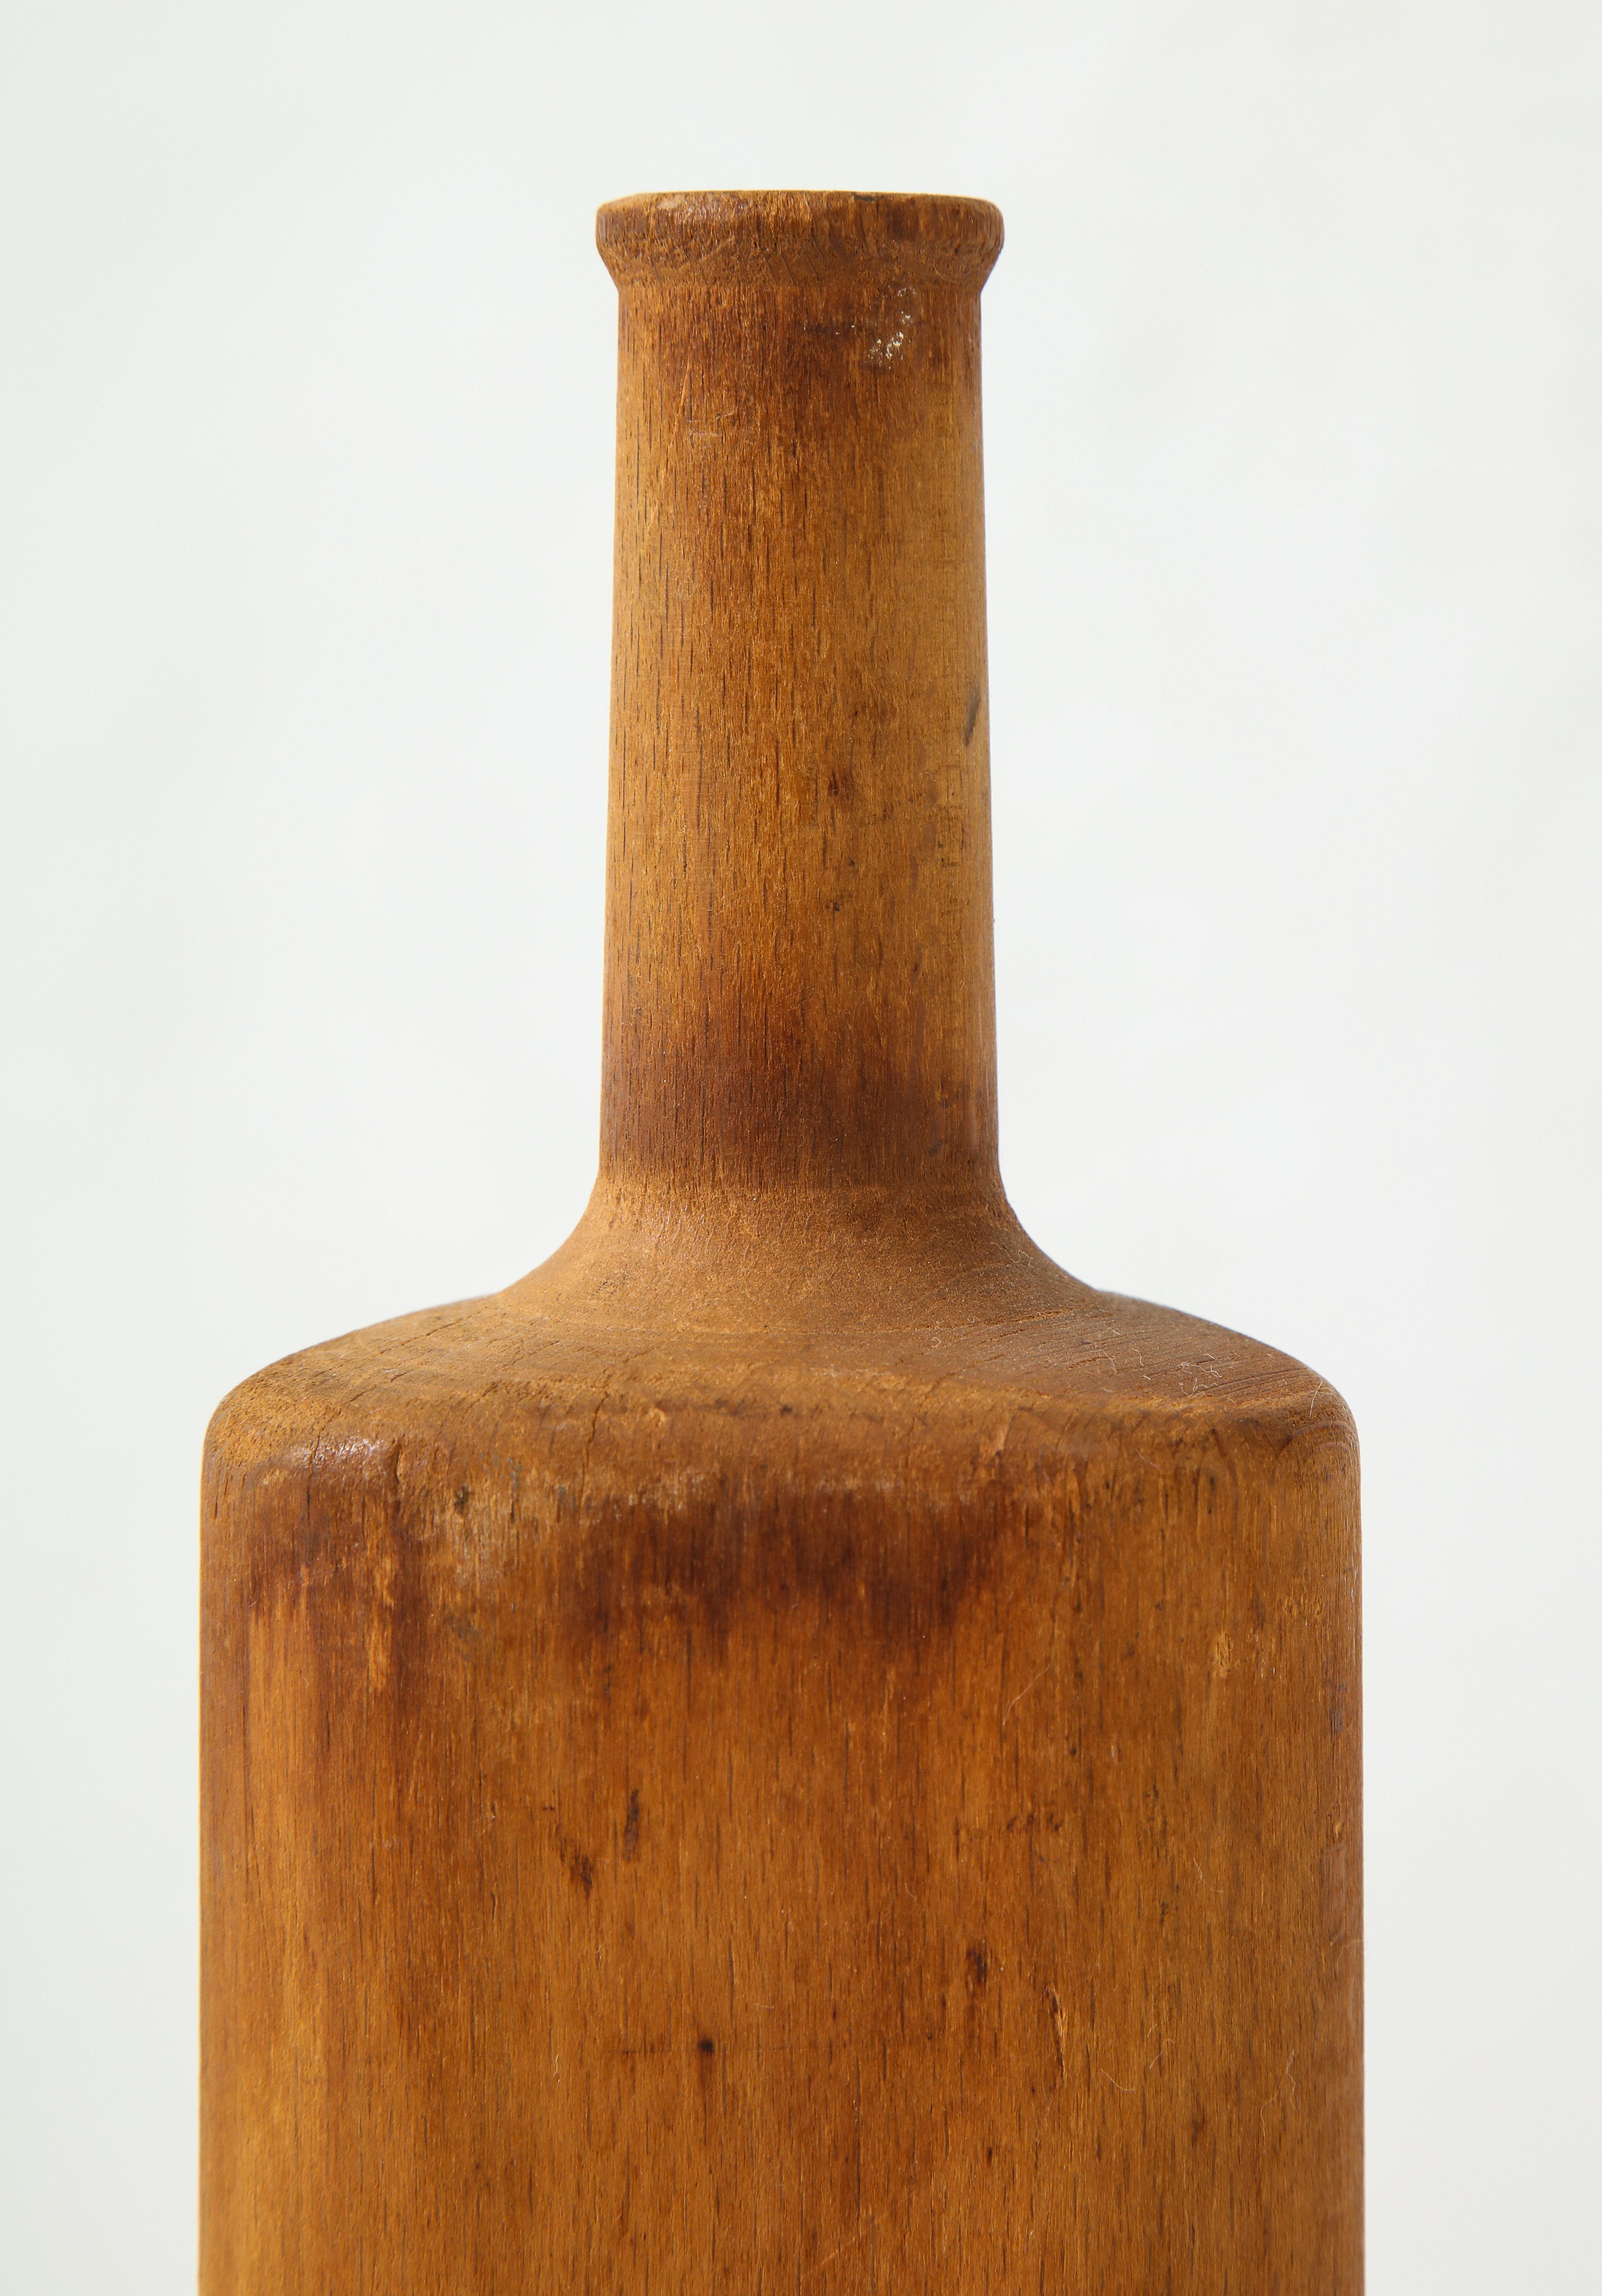 19th-Early 20th Century French Glass Bottle Mould In Good Condition For Sale In Brooklyn, NY